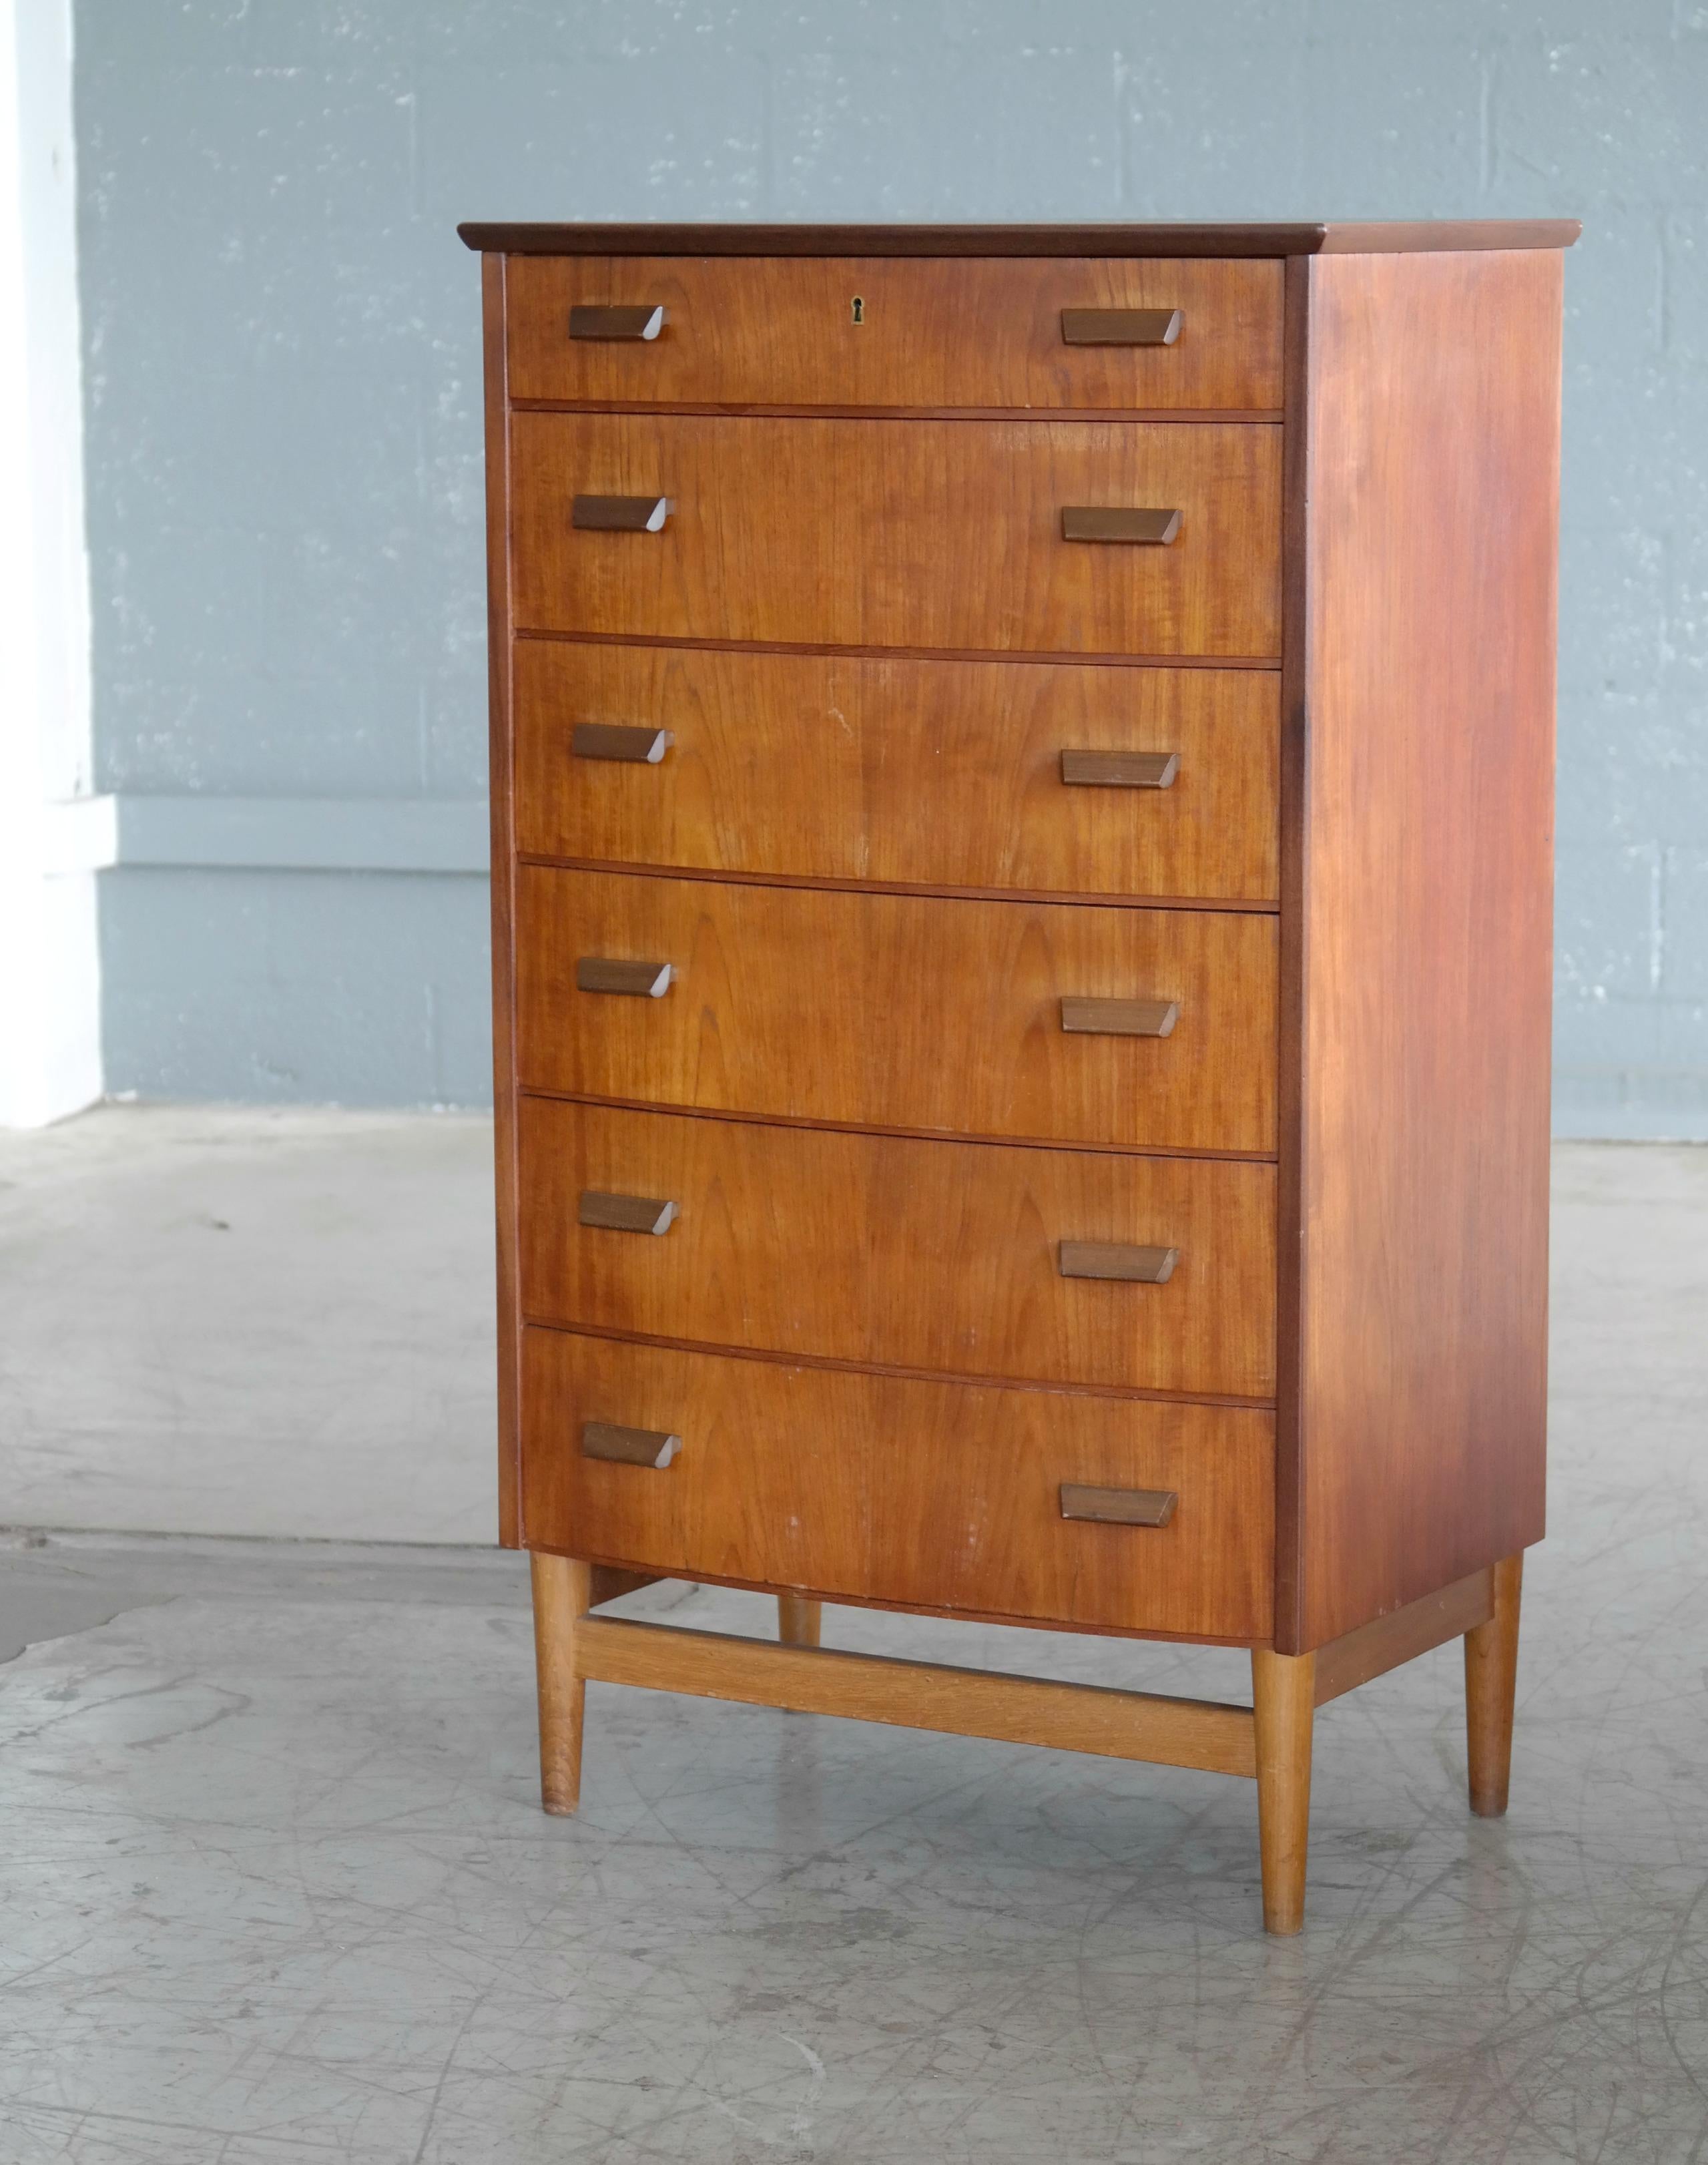 Bow-Front Dresser or Chest of Drawers in Teak Danish Midcentury